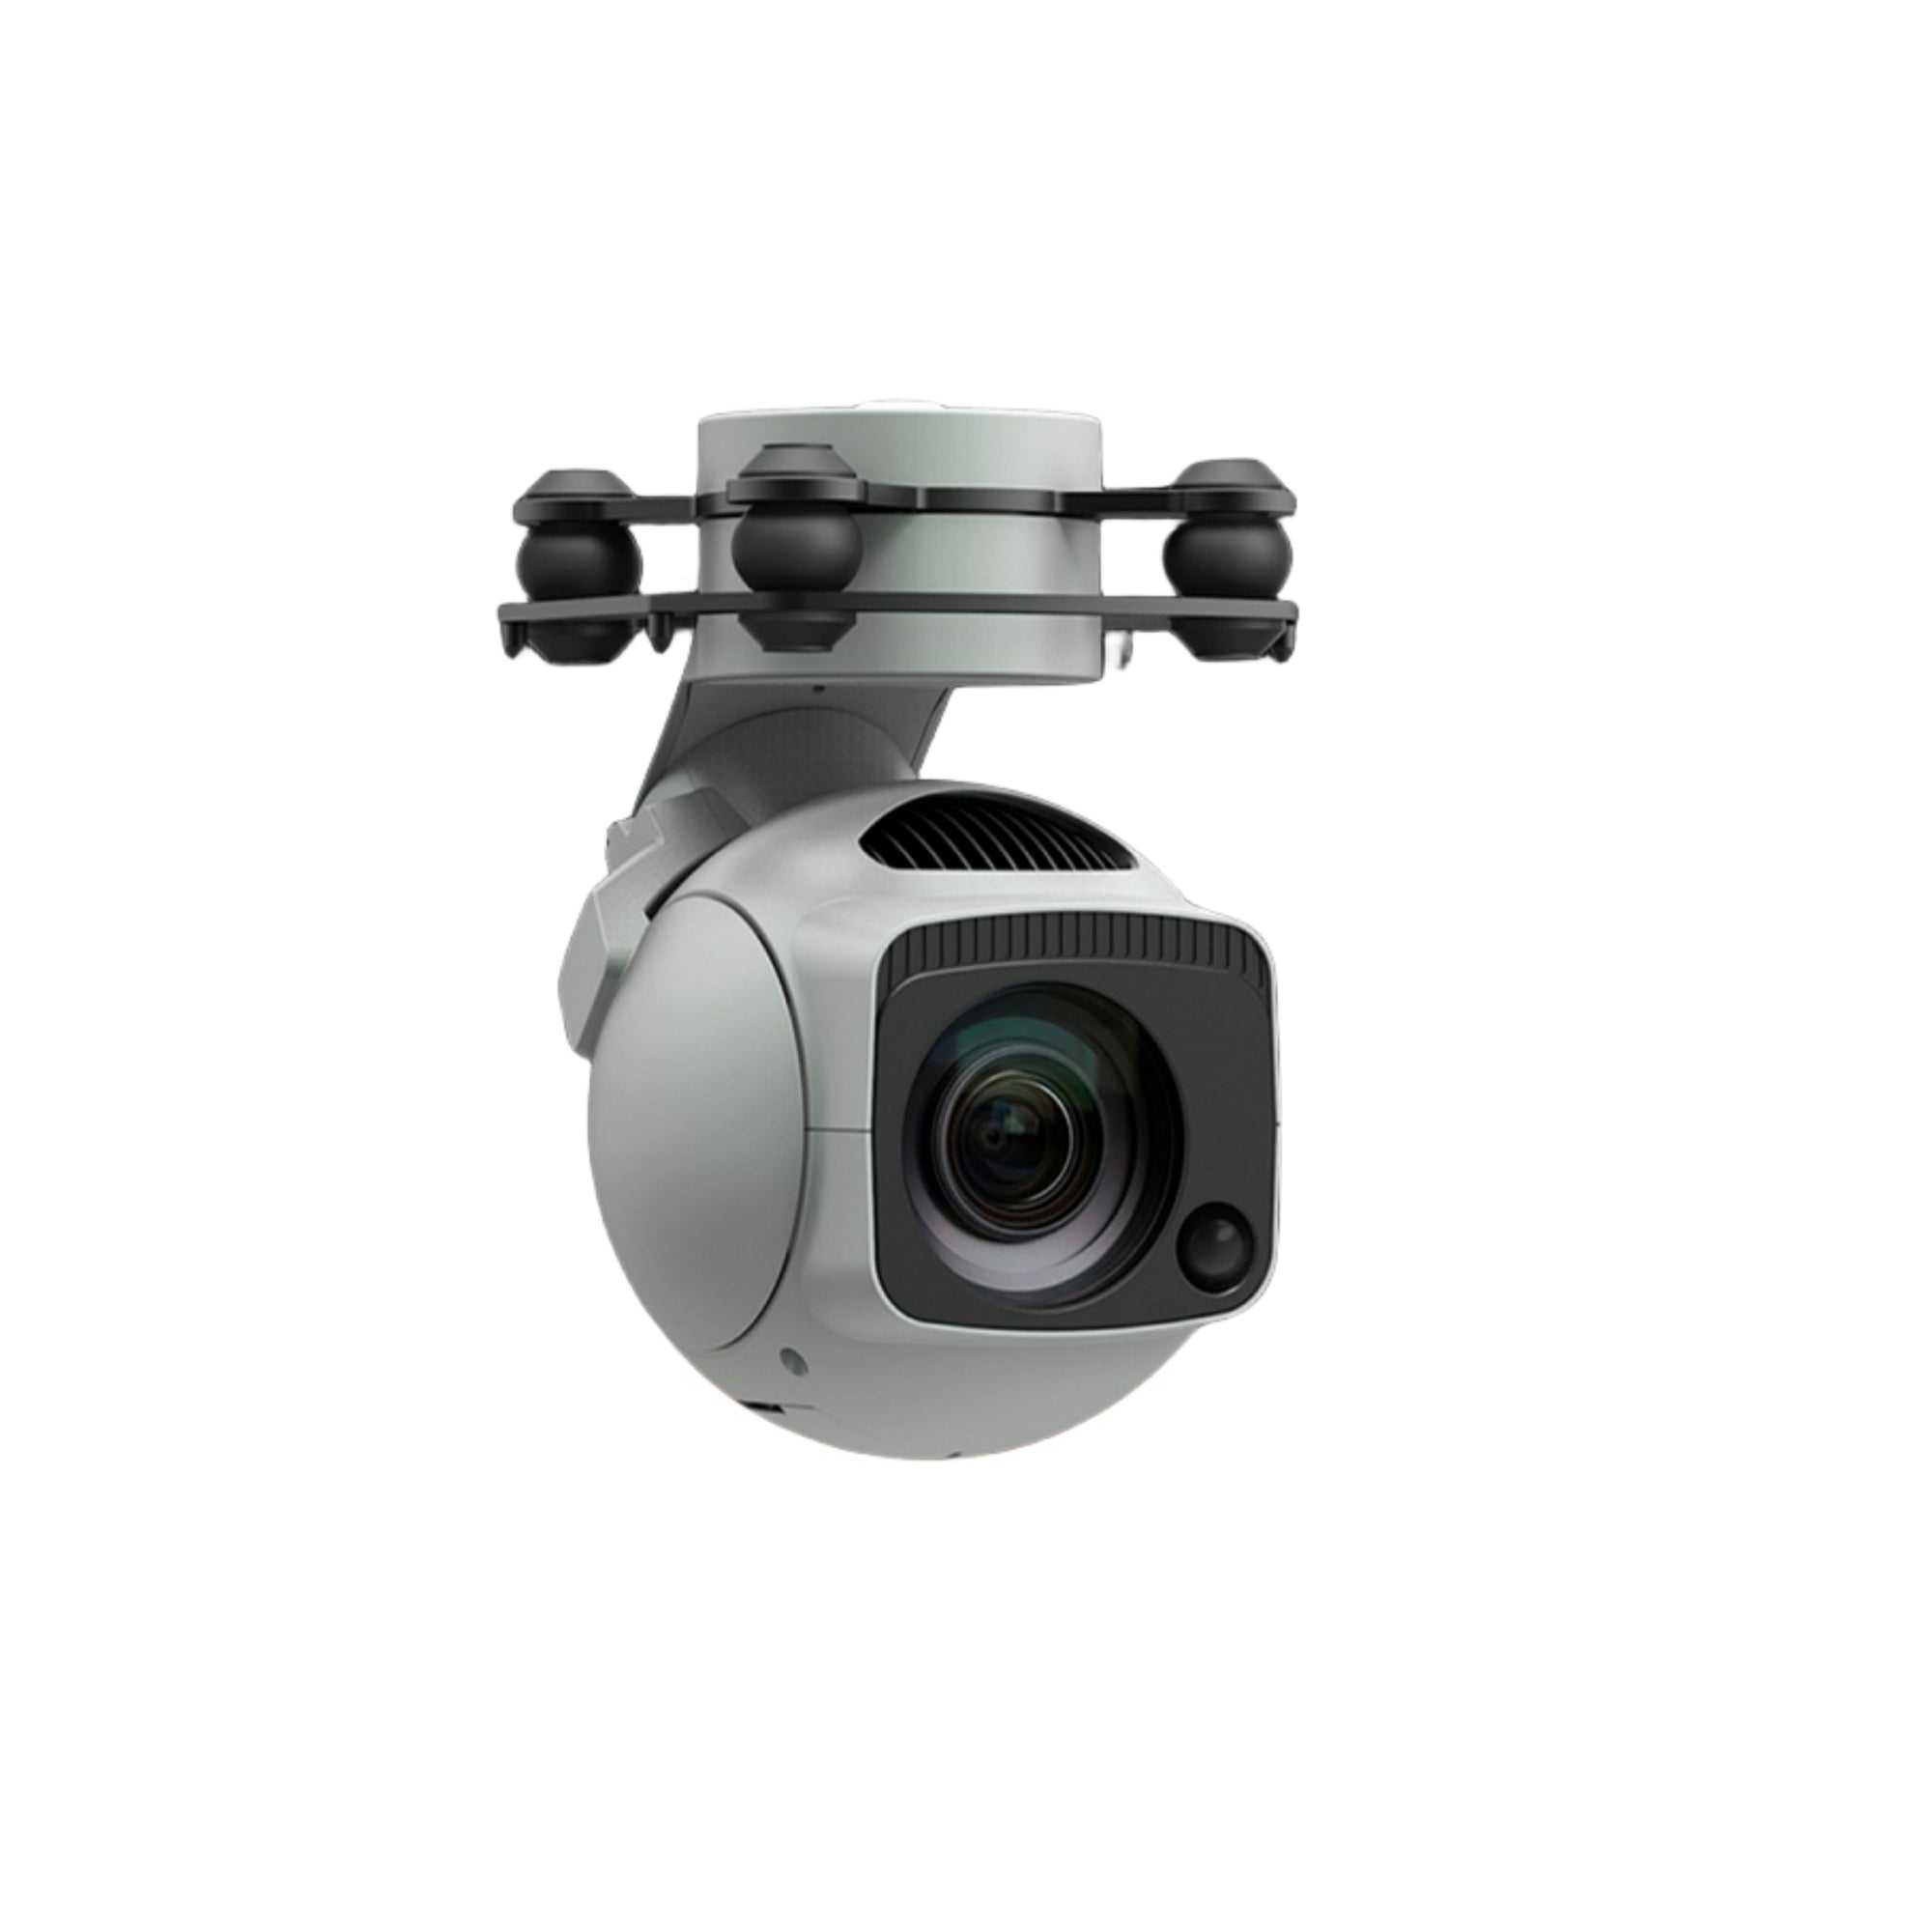 D80pro Gimbal Payload Camera-40x Hybrid Zoom (Night Verion View) - Unmanned RC